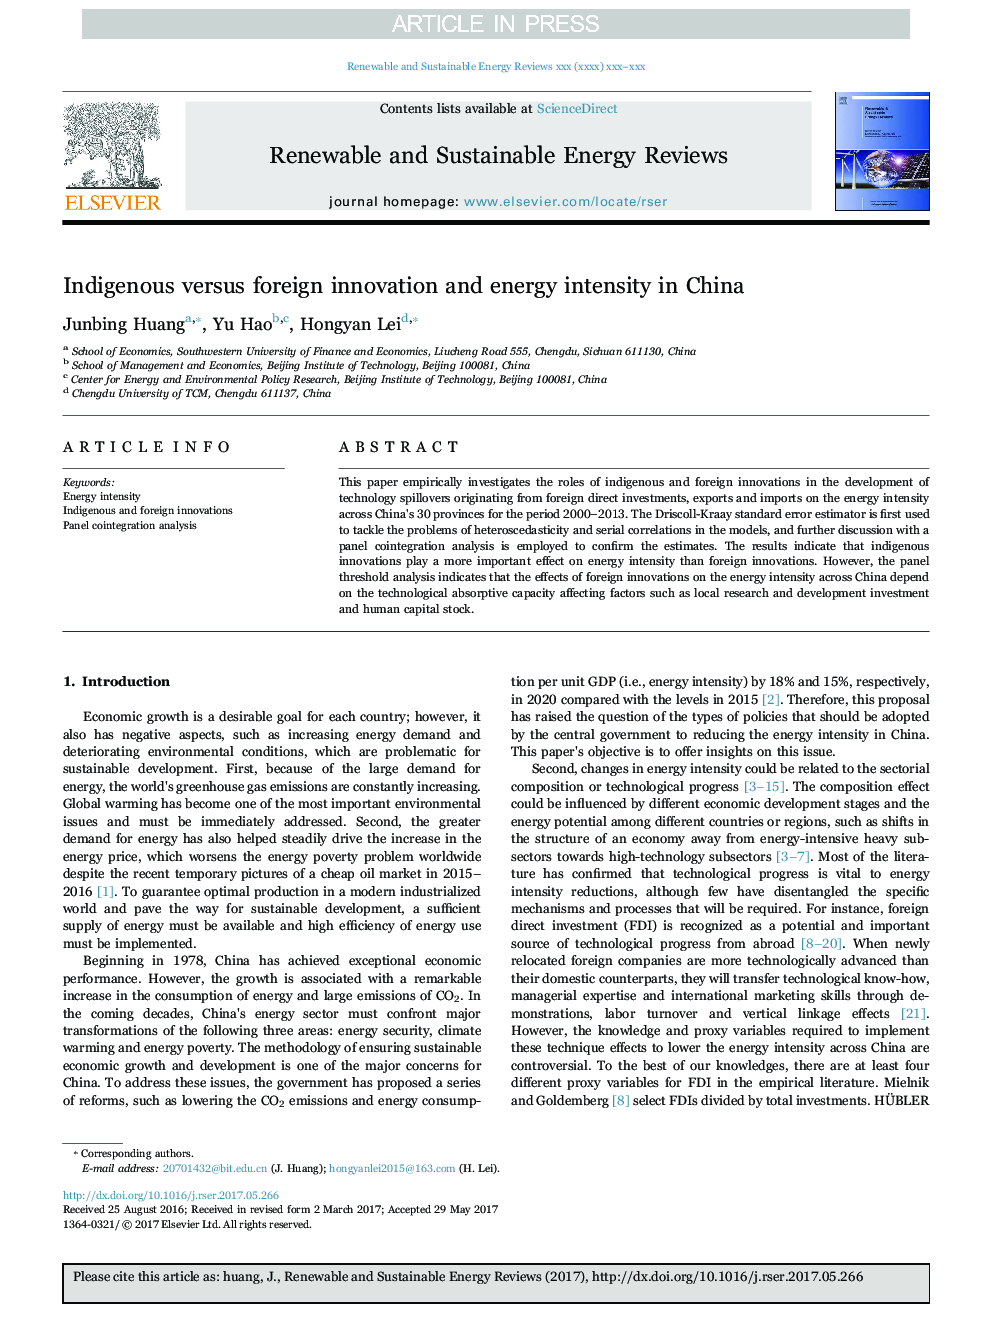 Indigenous versus foreign innovation and energy intensity in China